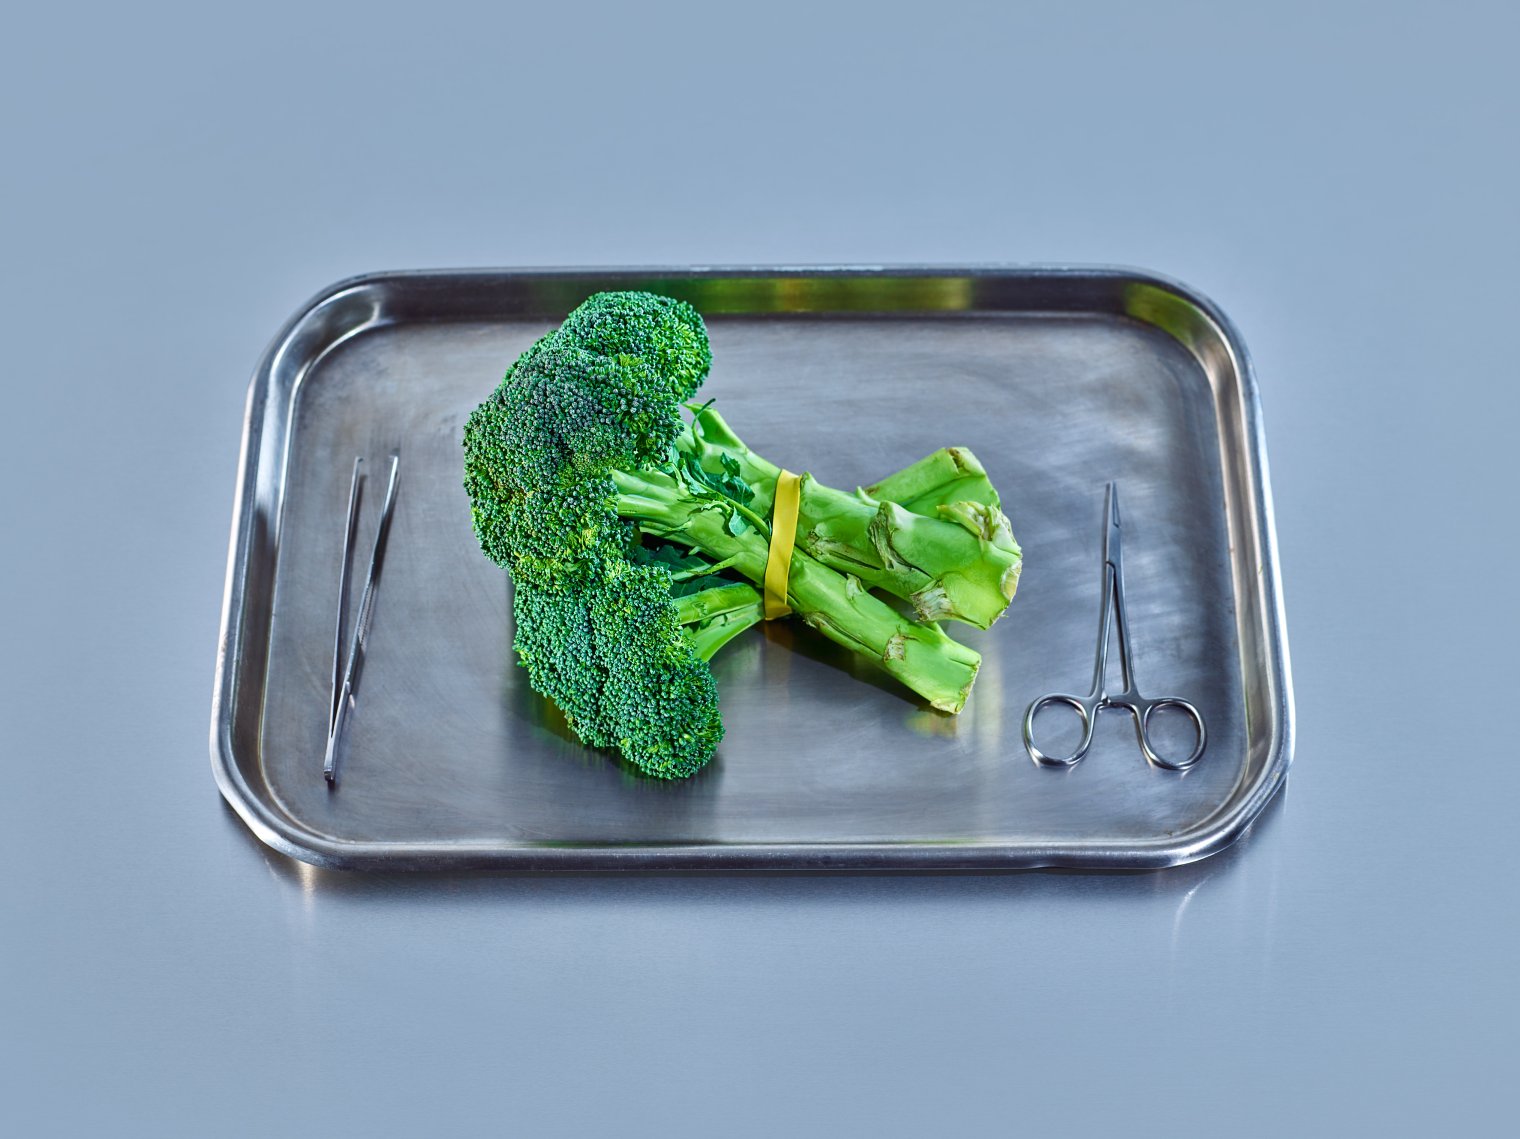 BROCCOLI | Loaded with glucosino­lates. Glucosinolates convert to compounds that can slow breast cancer cells from growing in the lab